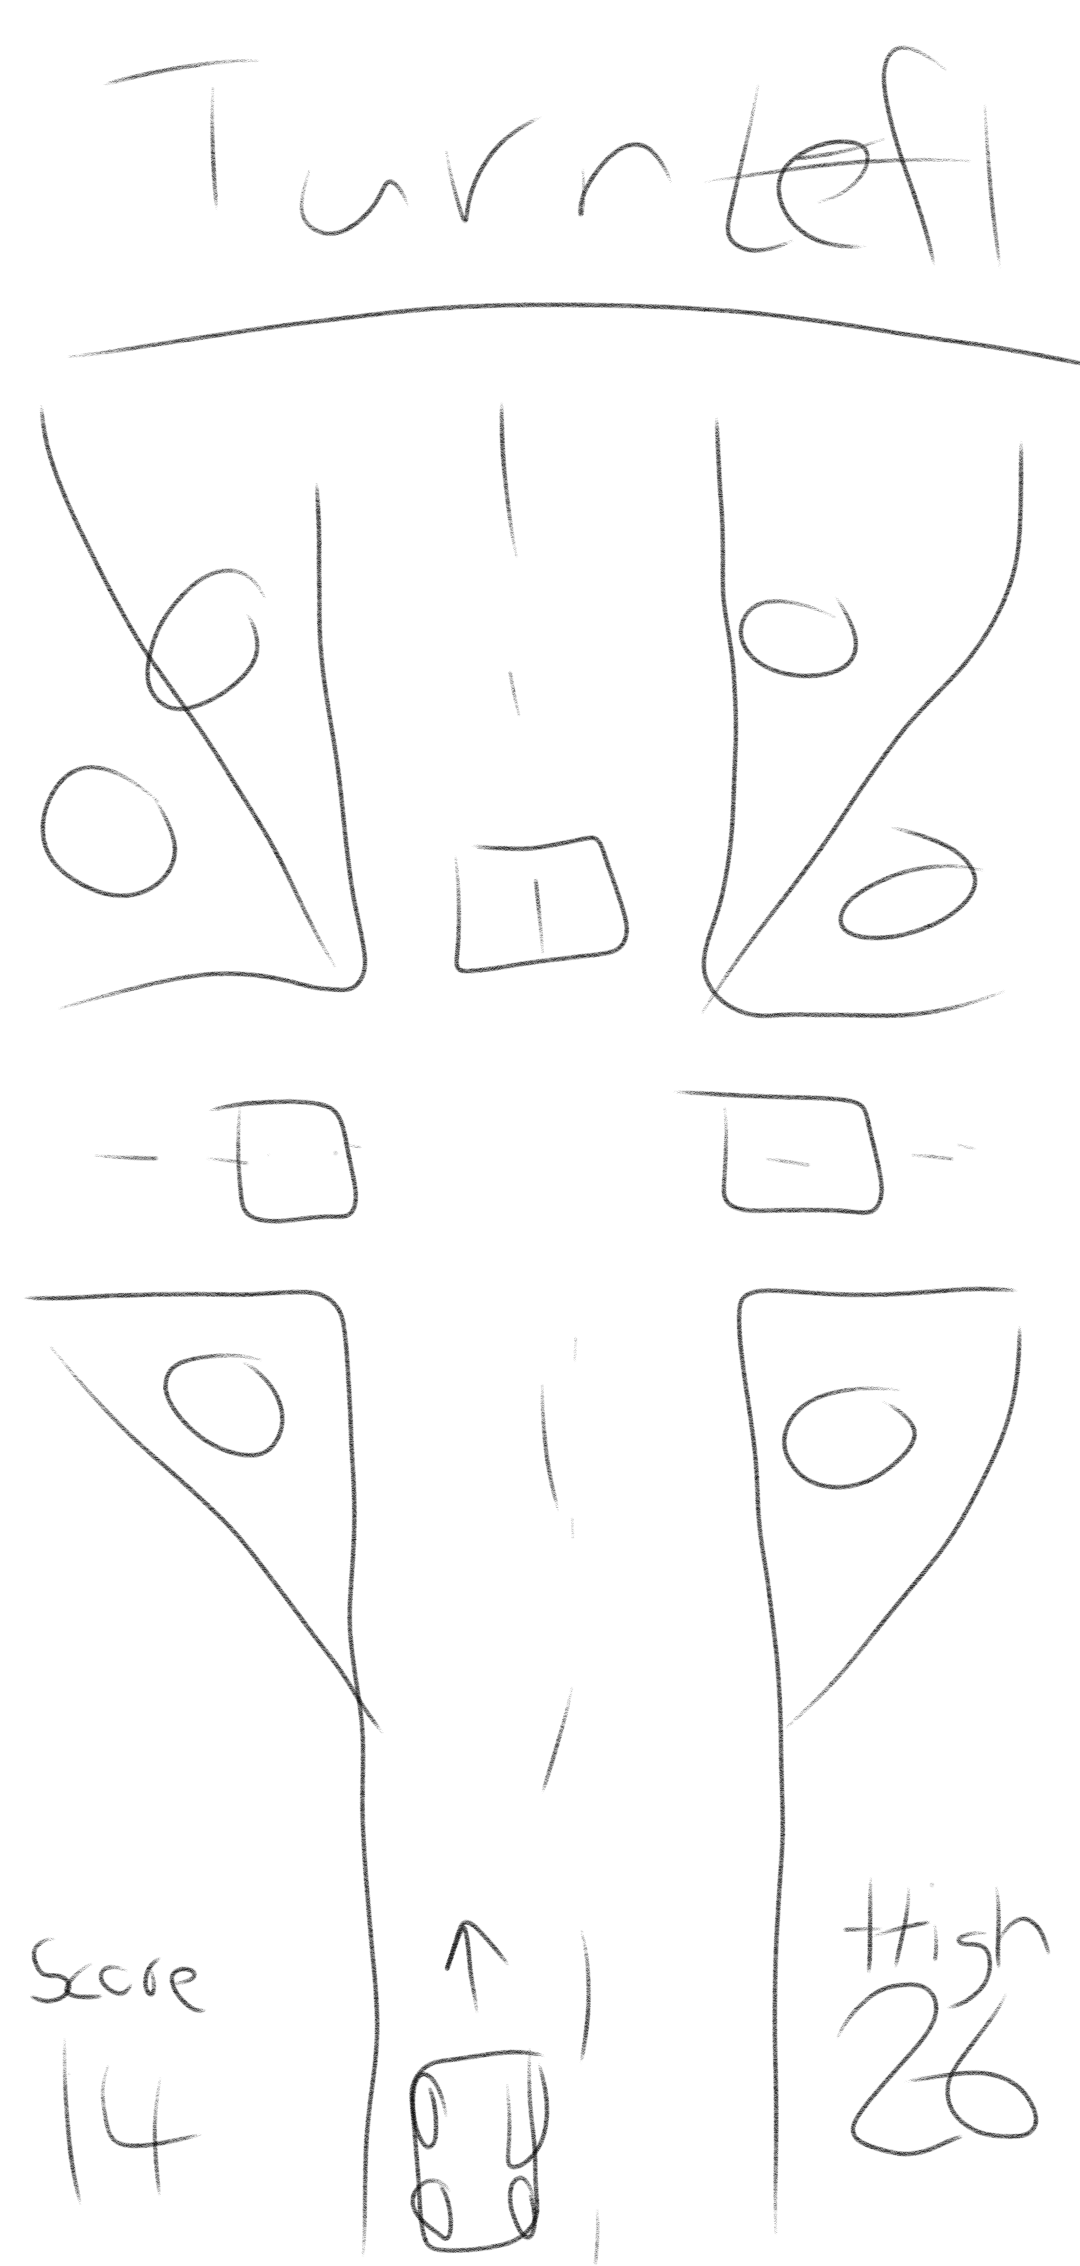 The initial sketch of the game layout 